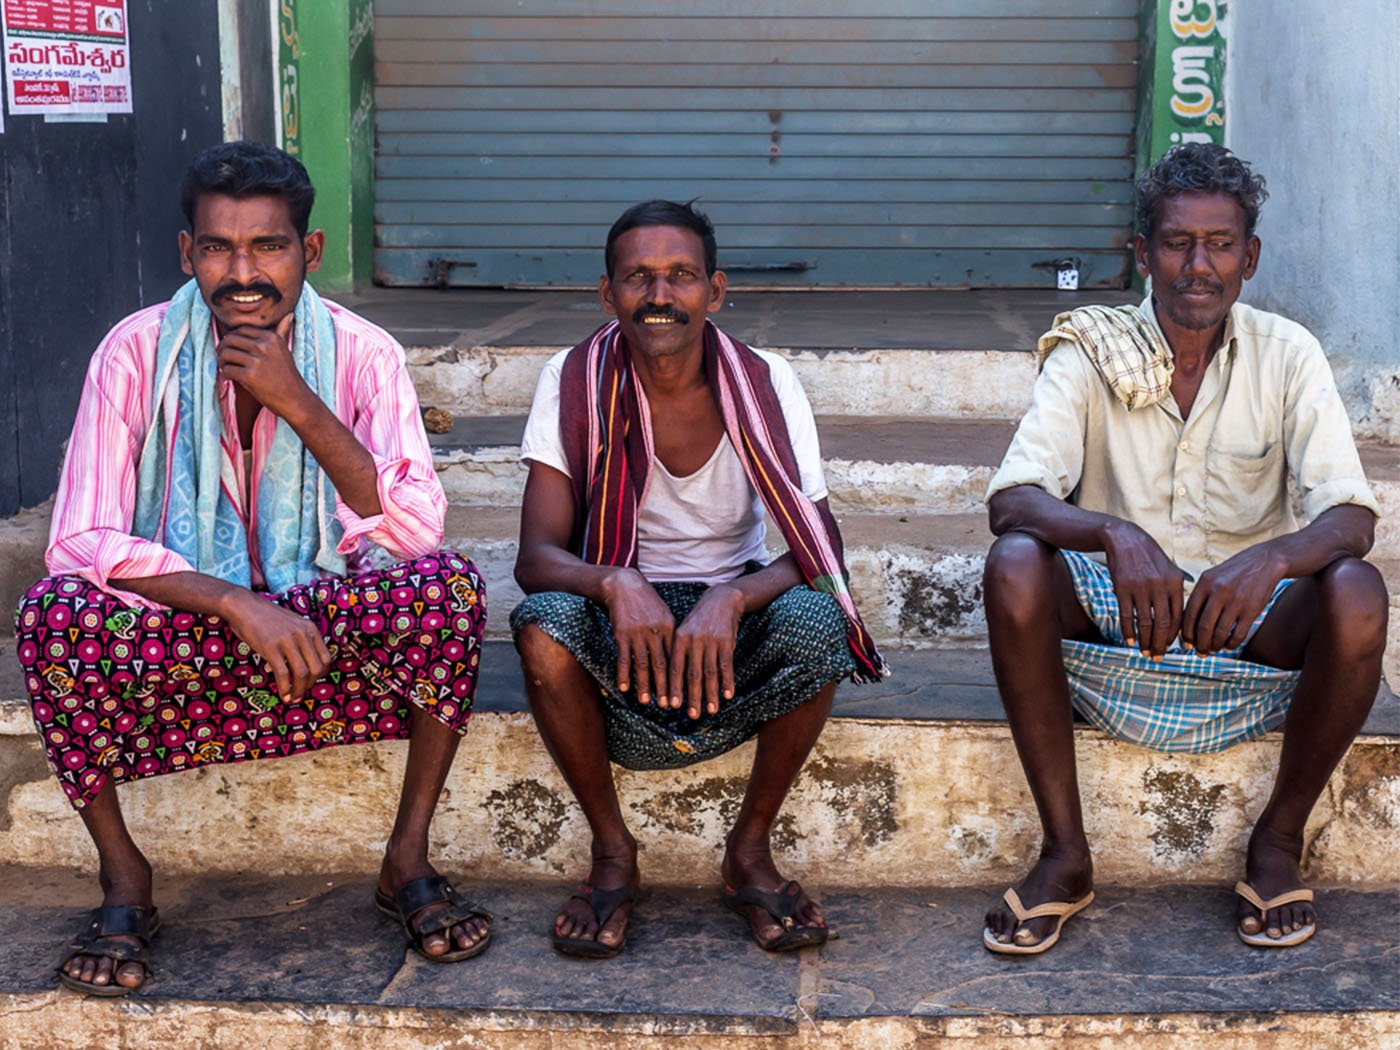 Farmers sitting in front of local shop